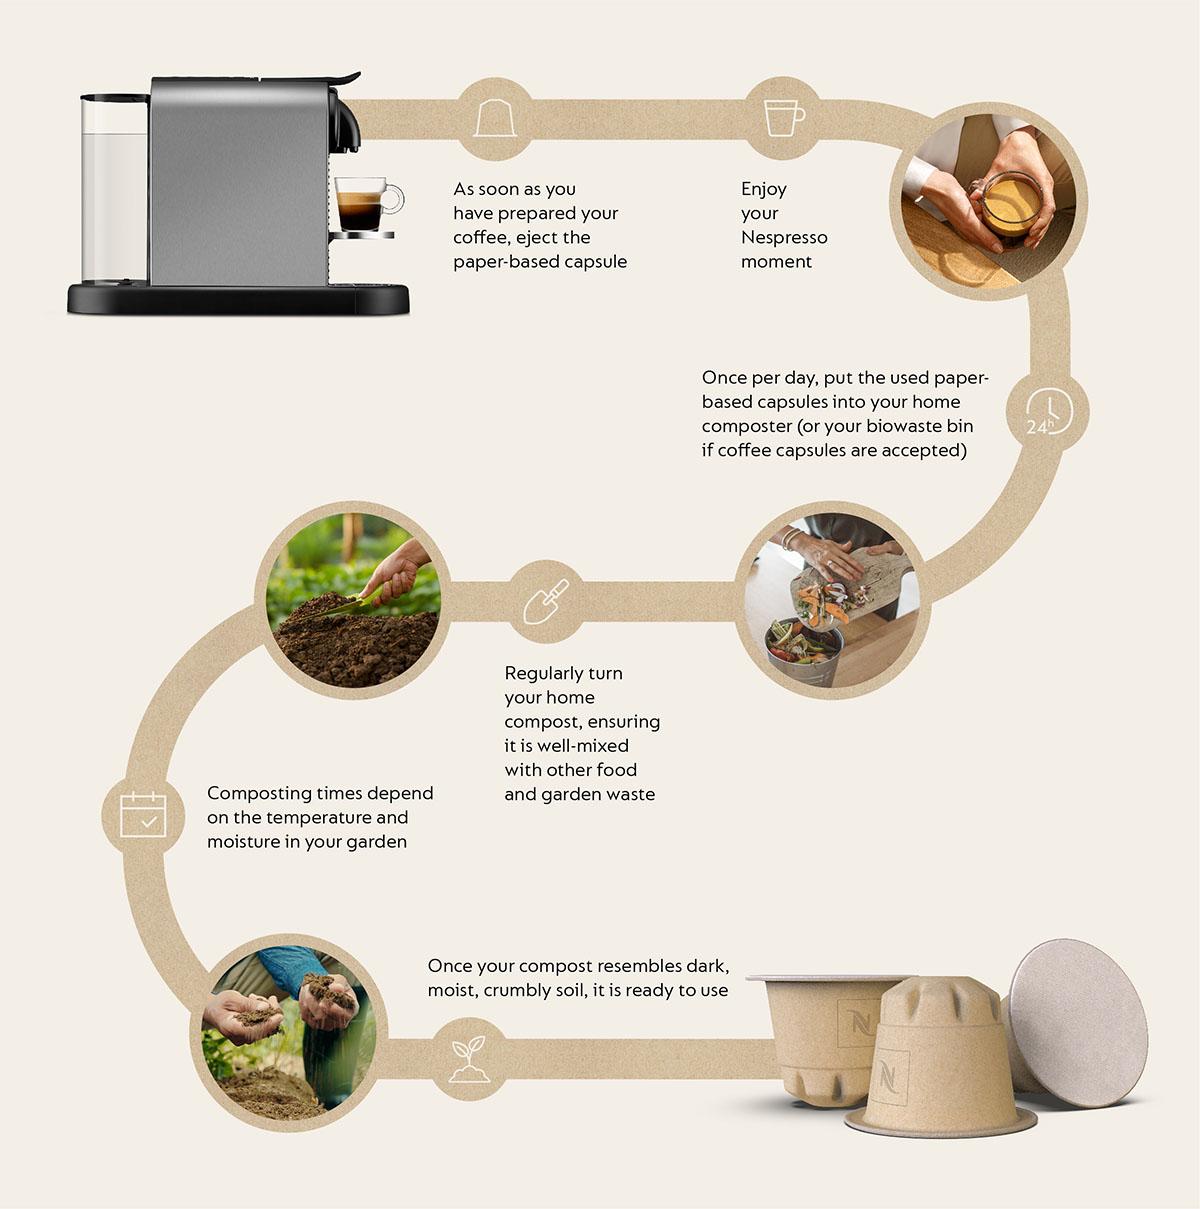 How to Recycle Nespresso Pods at Work (Step-by-Step)